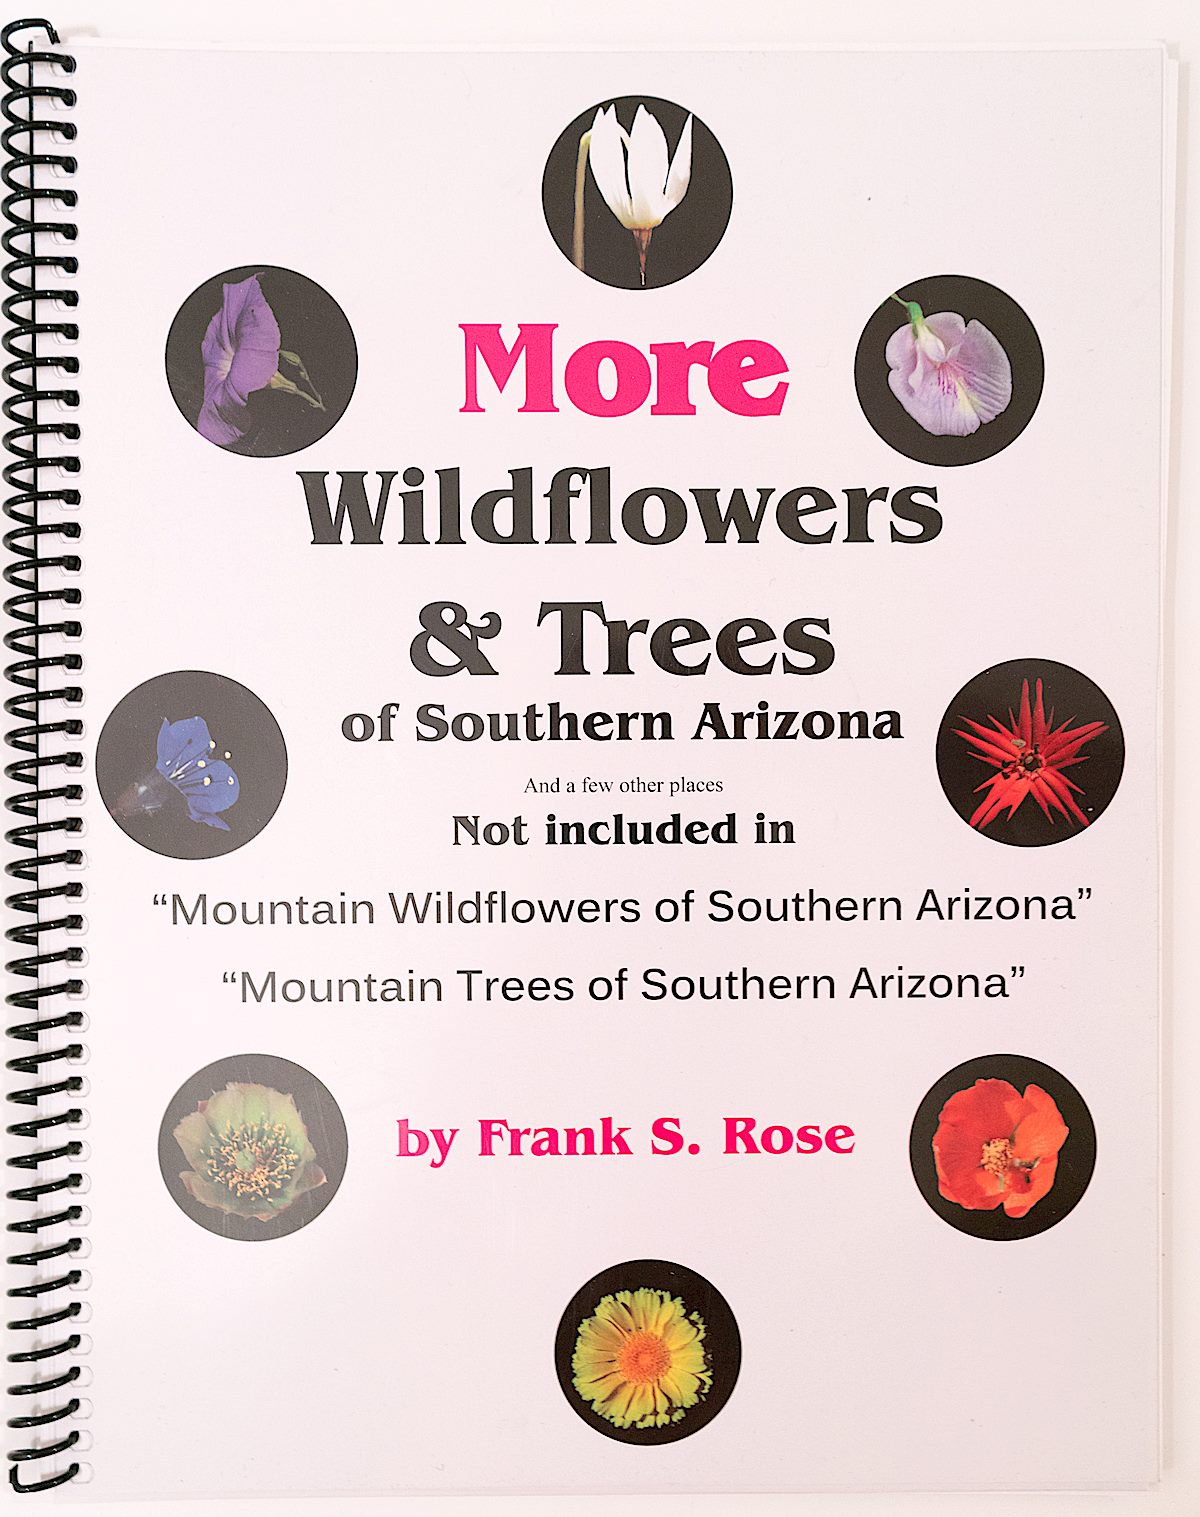 More Wildflower & Trees of Southern Arizona, Frank Rose. December 2016.